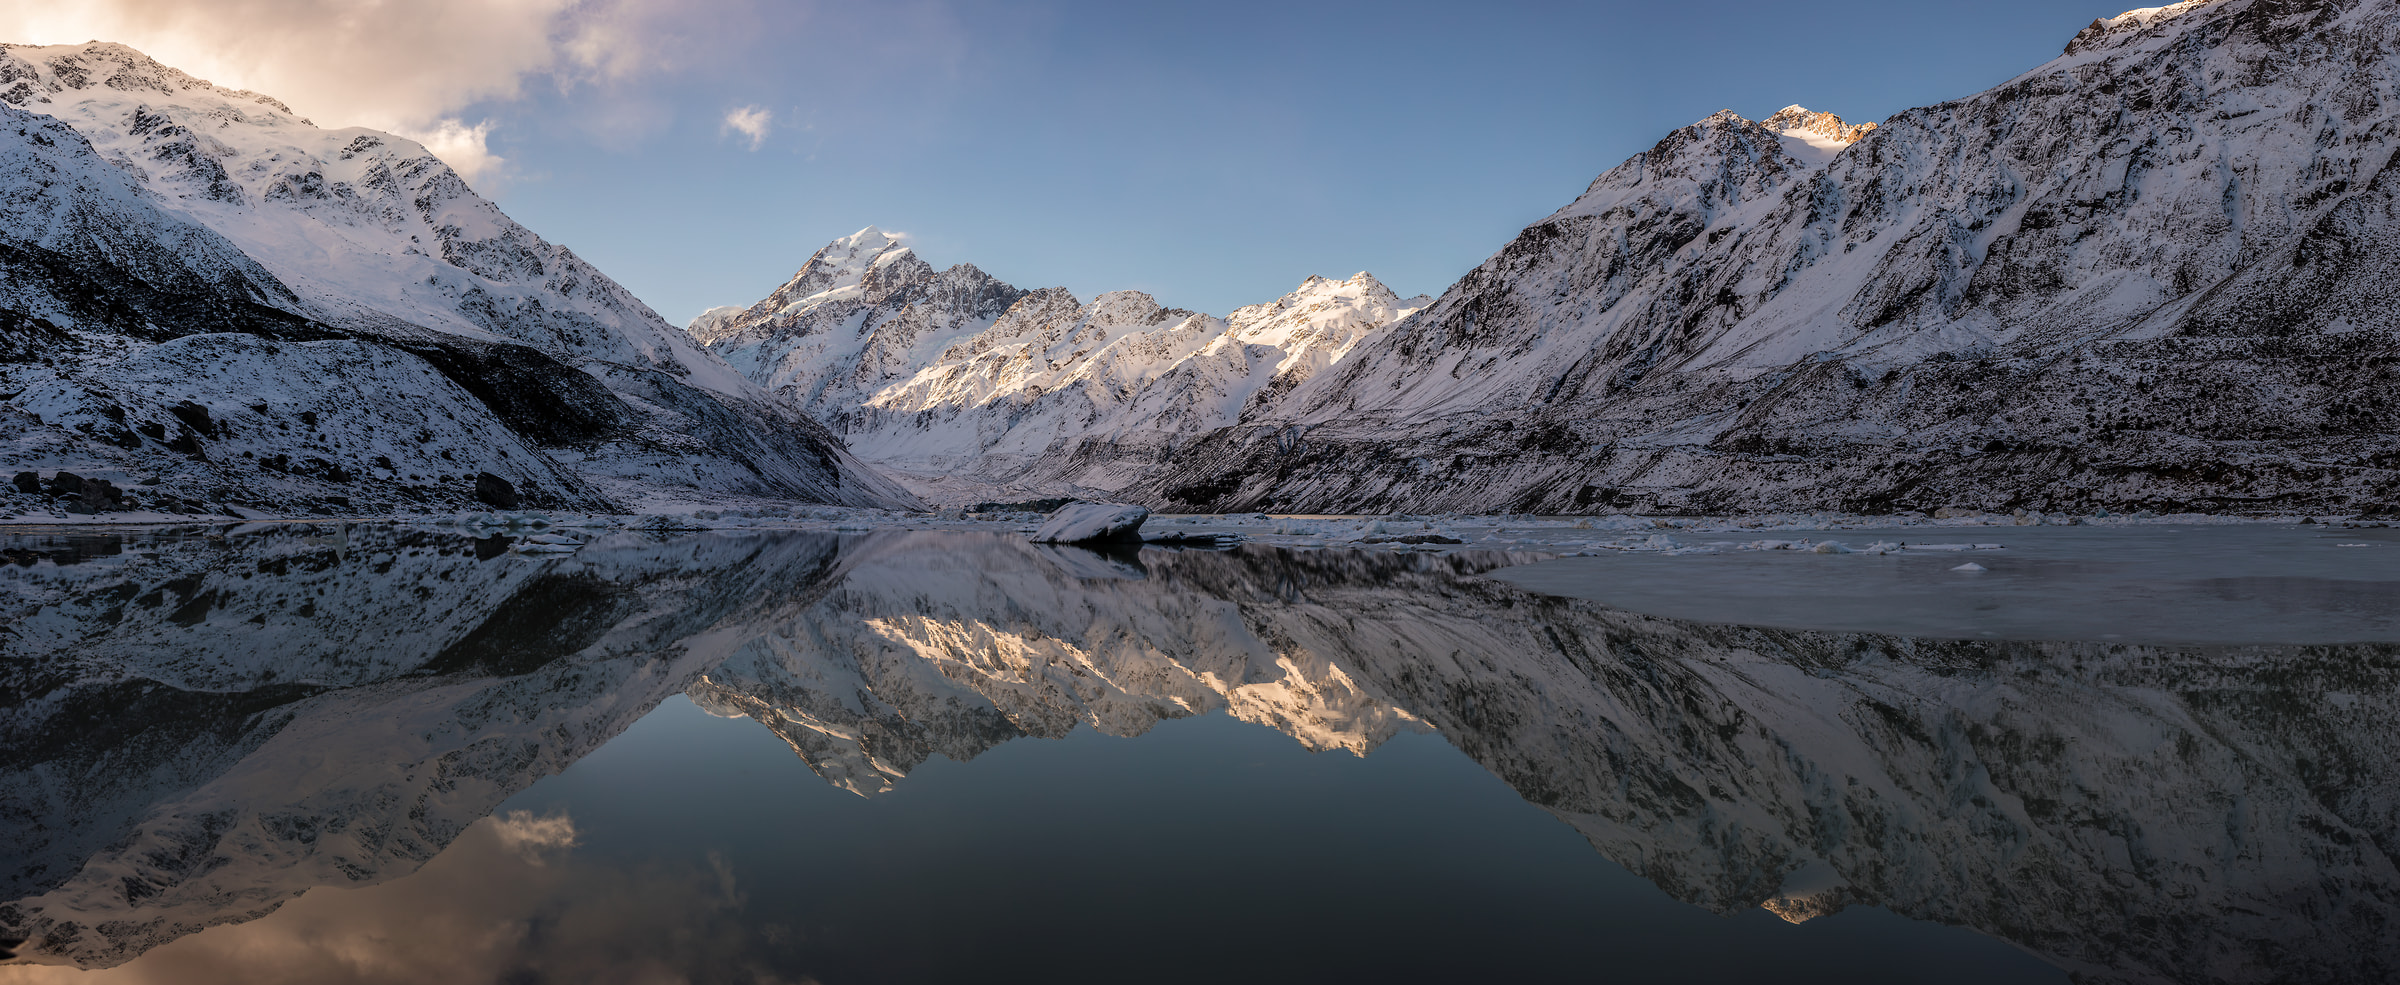 669 megapixels! A very high resolution, large-format VAST photo print of a frozen lake and mountains. Nature landscape mountain photo created by Chris Collacott at Mt Aoraki and Mt. Cook National Park.